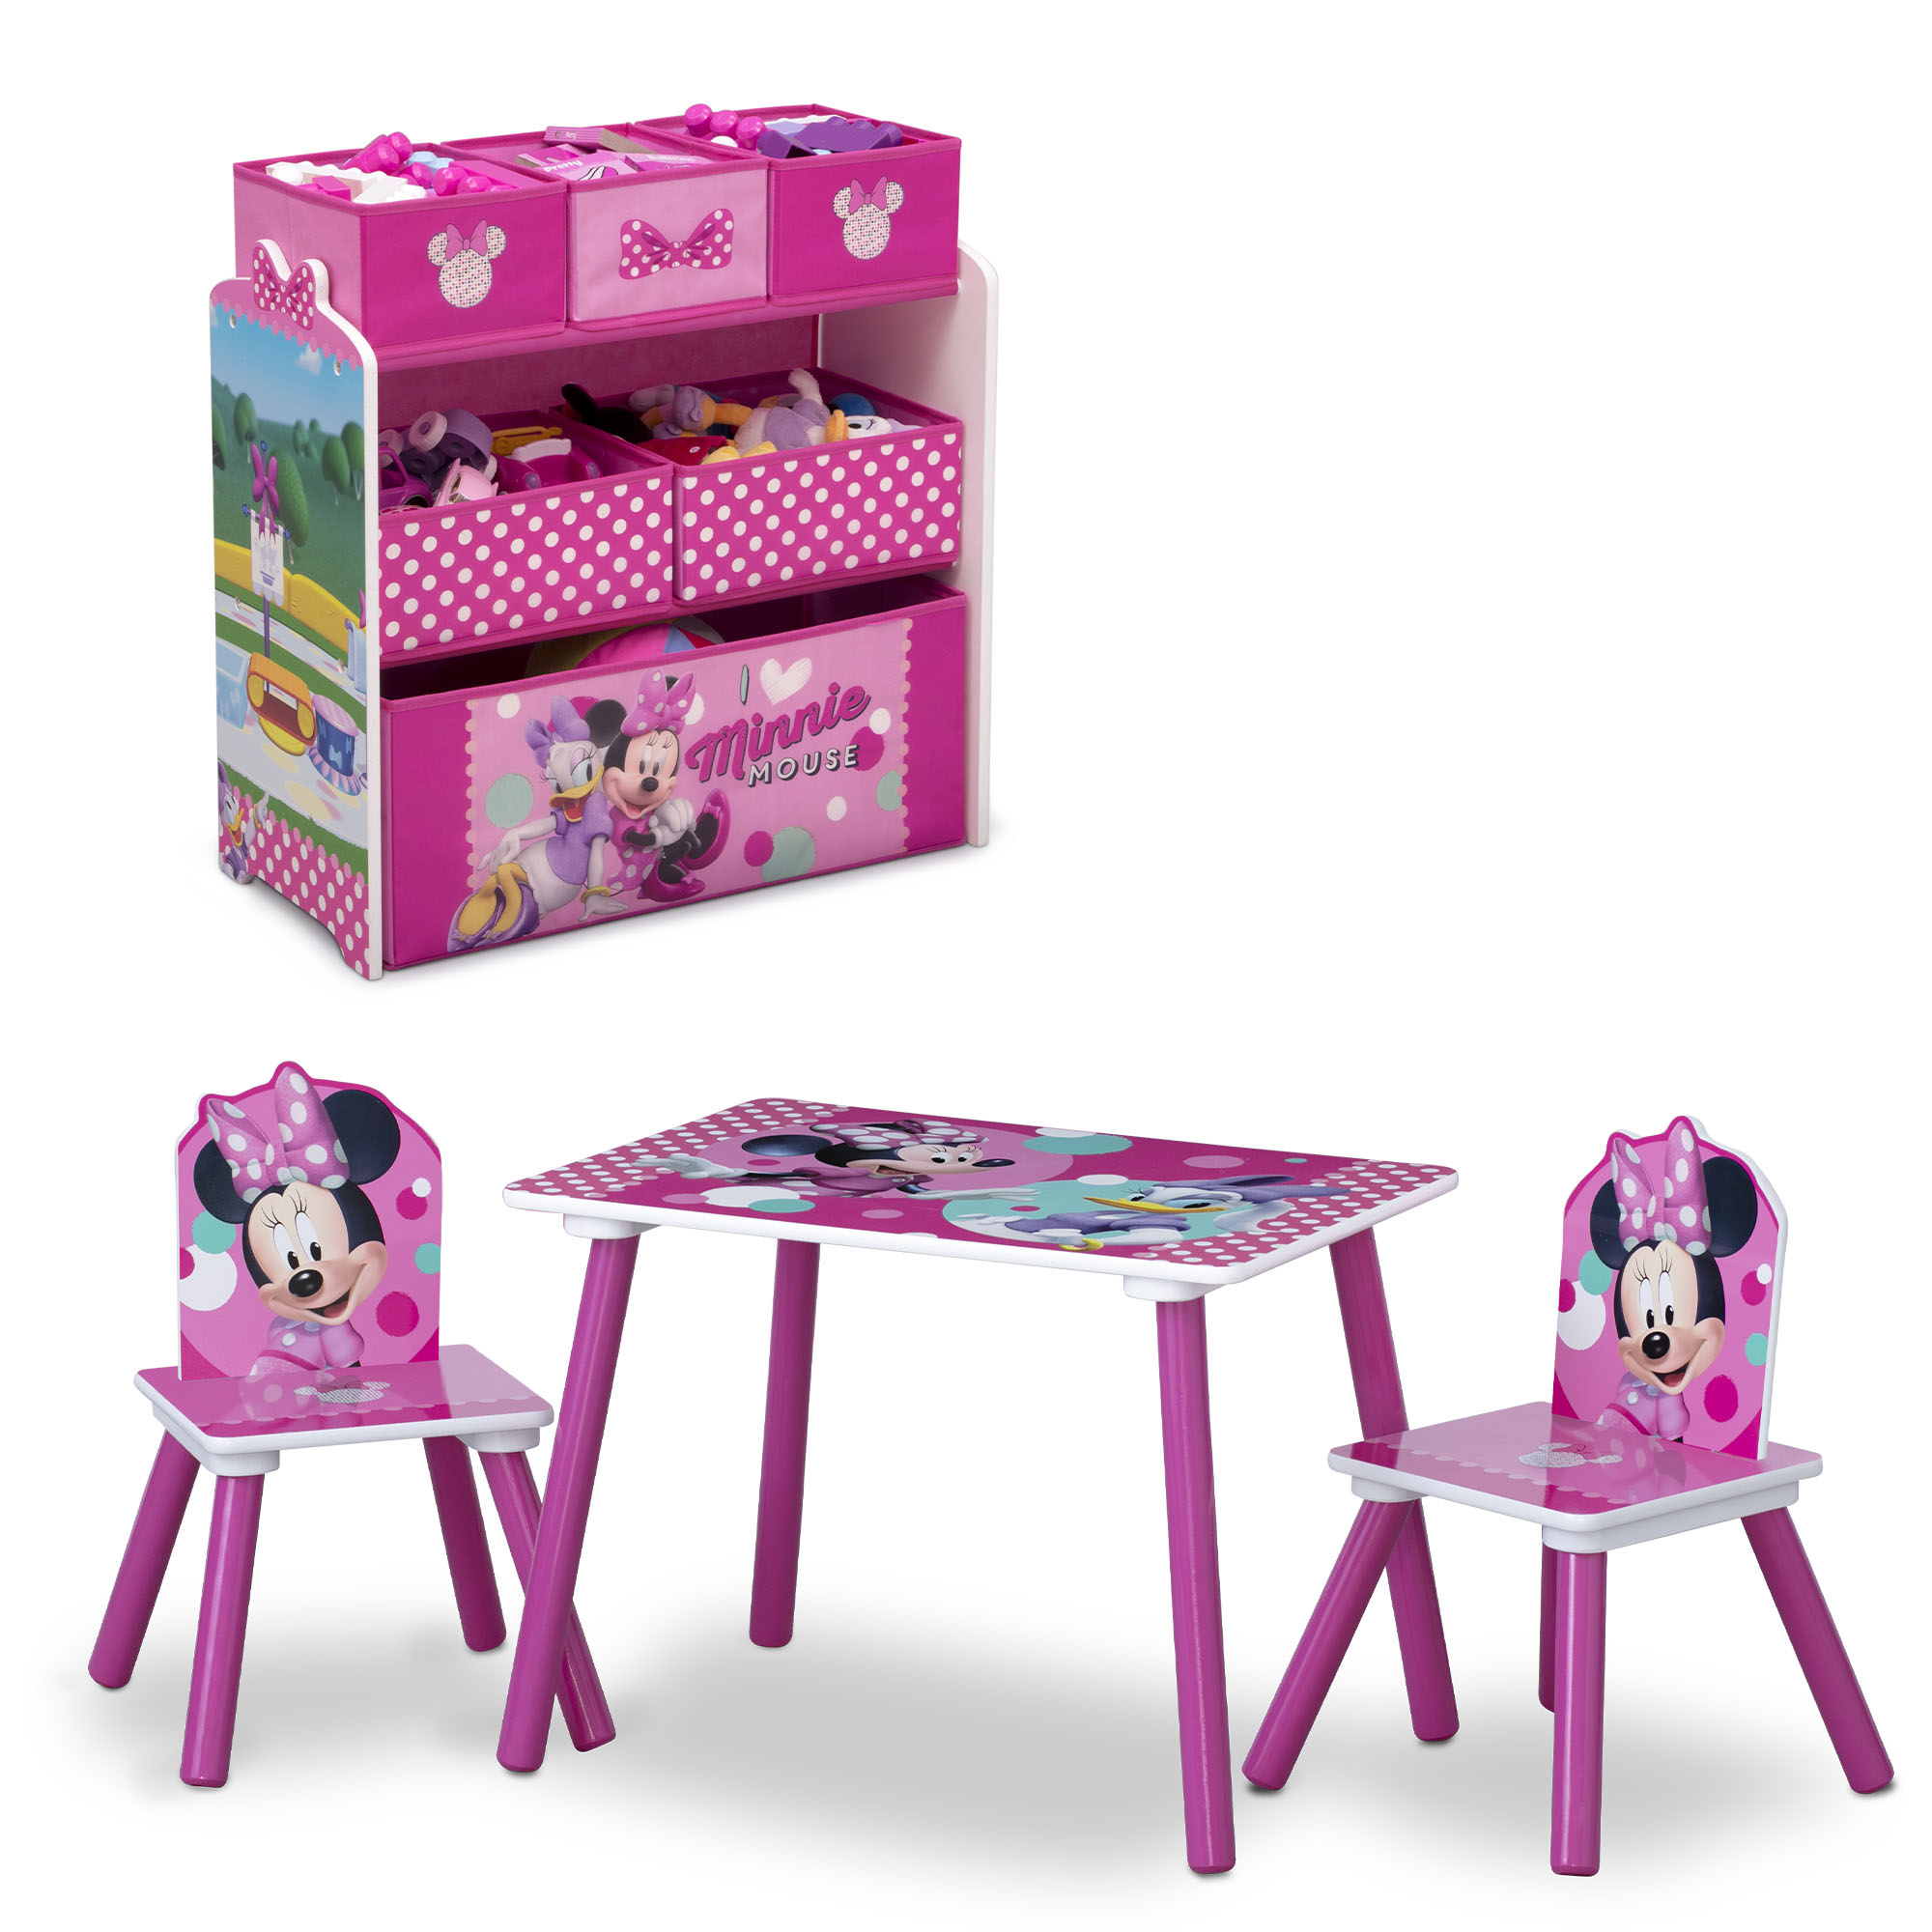 Minnie Mouse 4-Piece Wood Toddler Playroom Set – Includes Table, 2 Chairs & Toy Bin, Pink - image 1 of 13